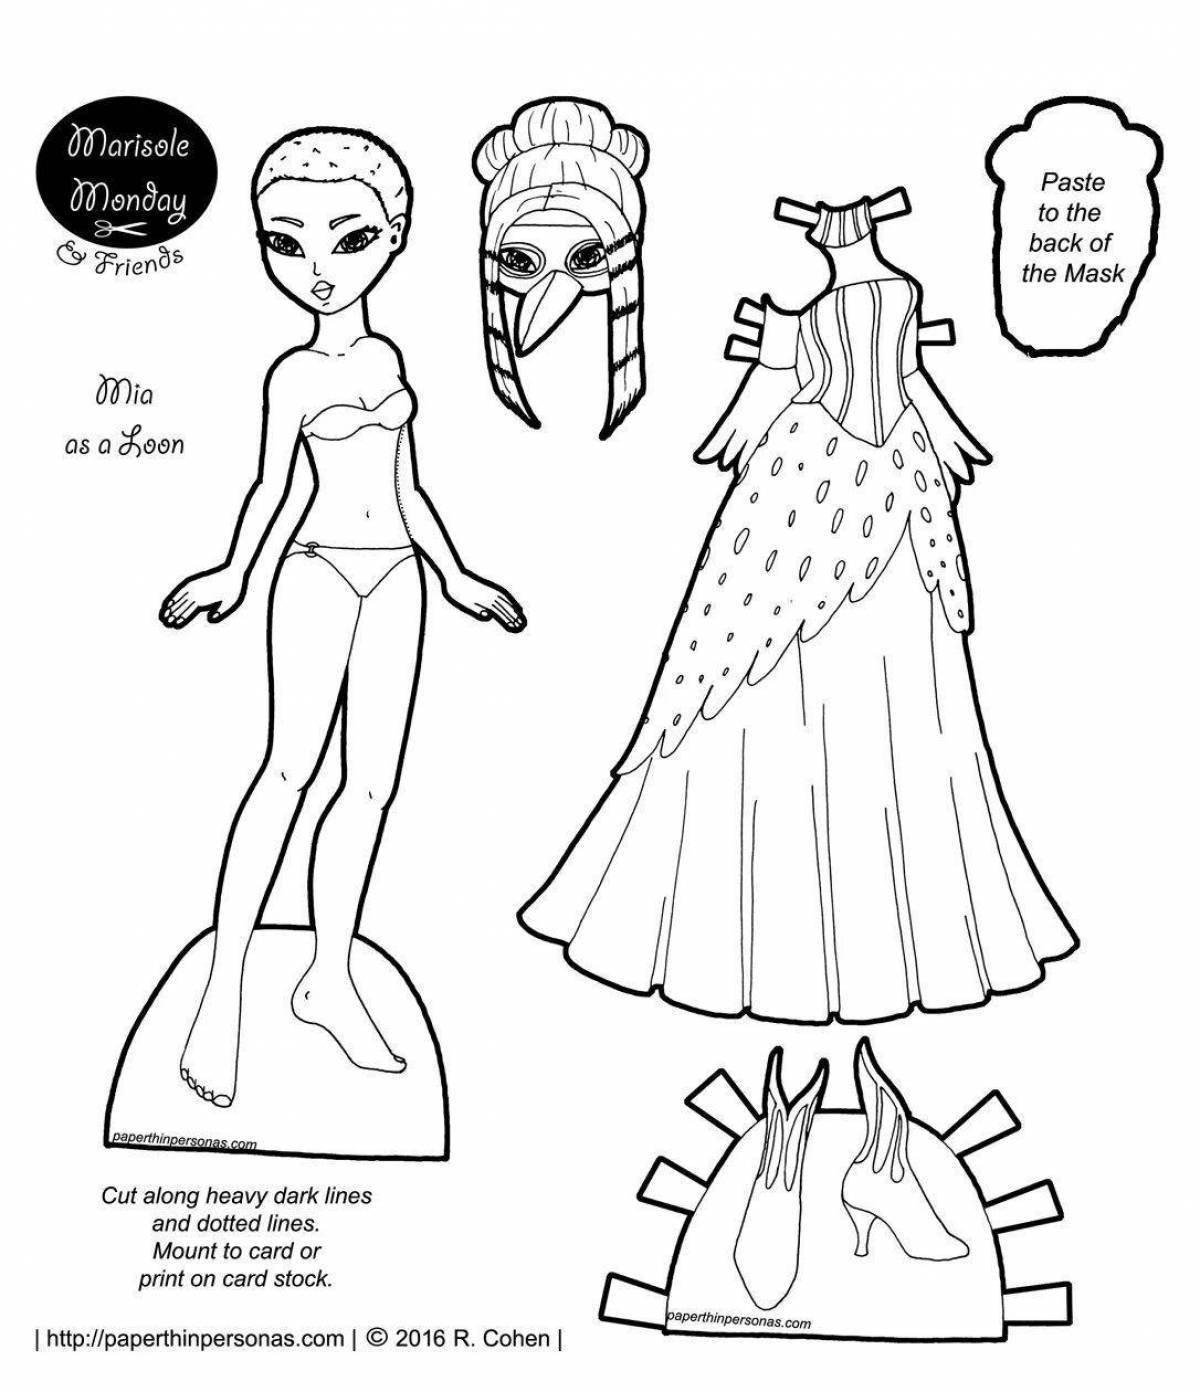 Colorful bright paper doll, coloring cut out